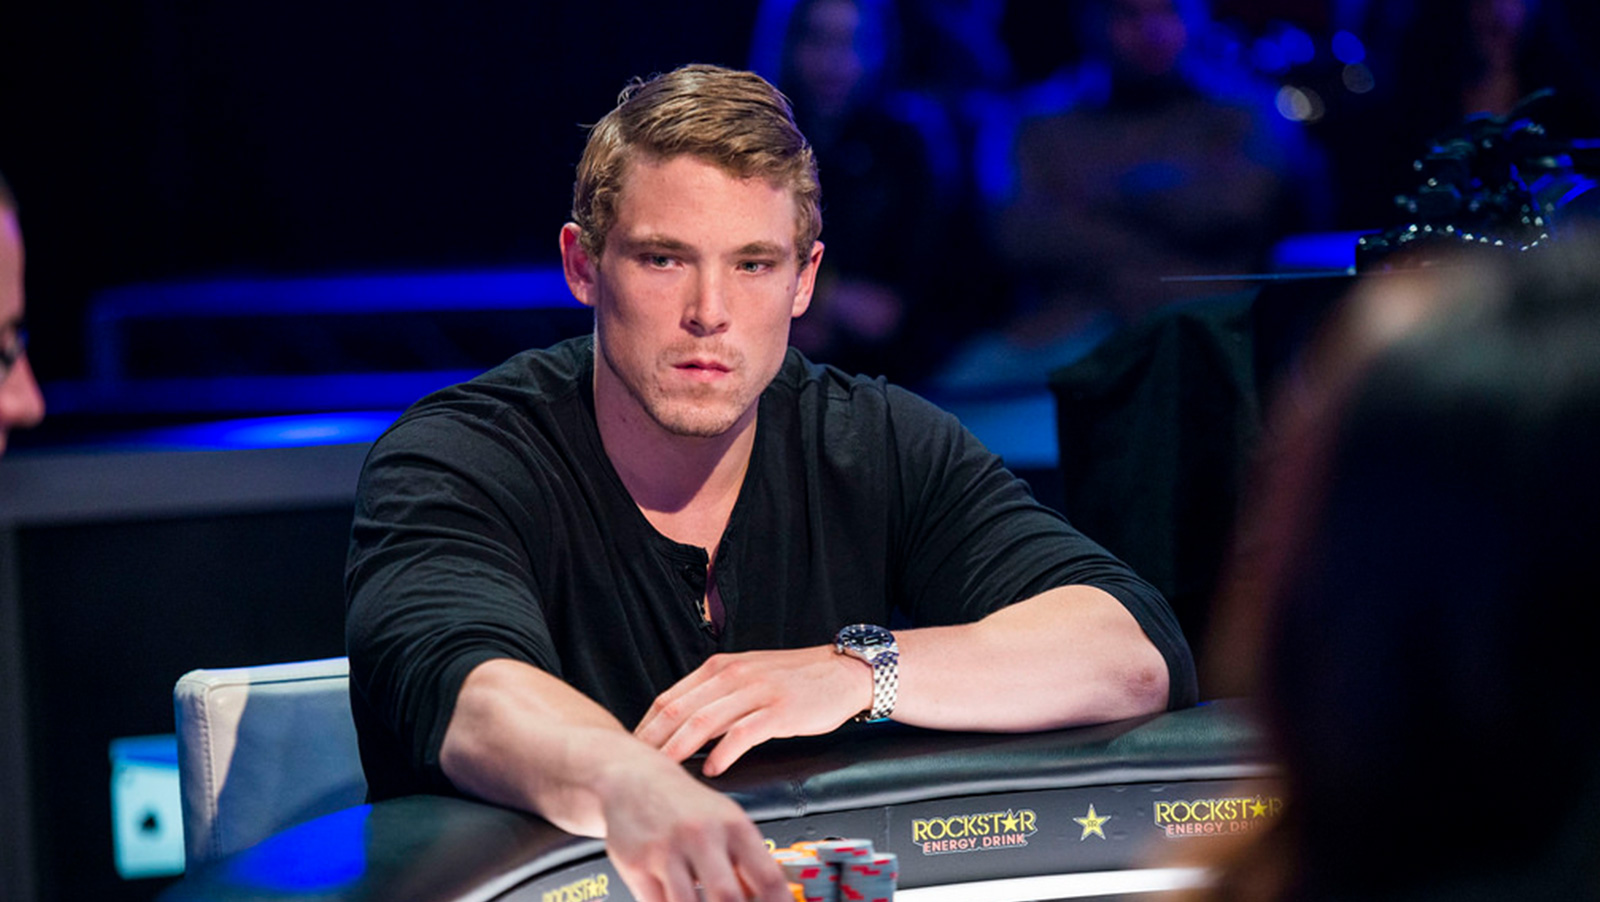 Foxen set to accumulate record pts total in a thrilling climax to GPI PoY race